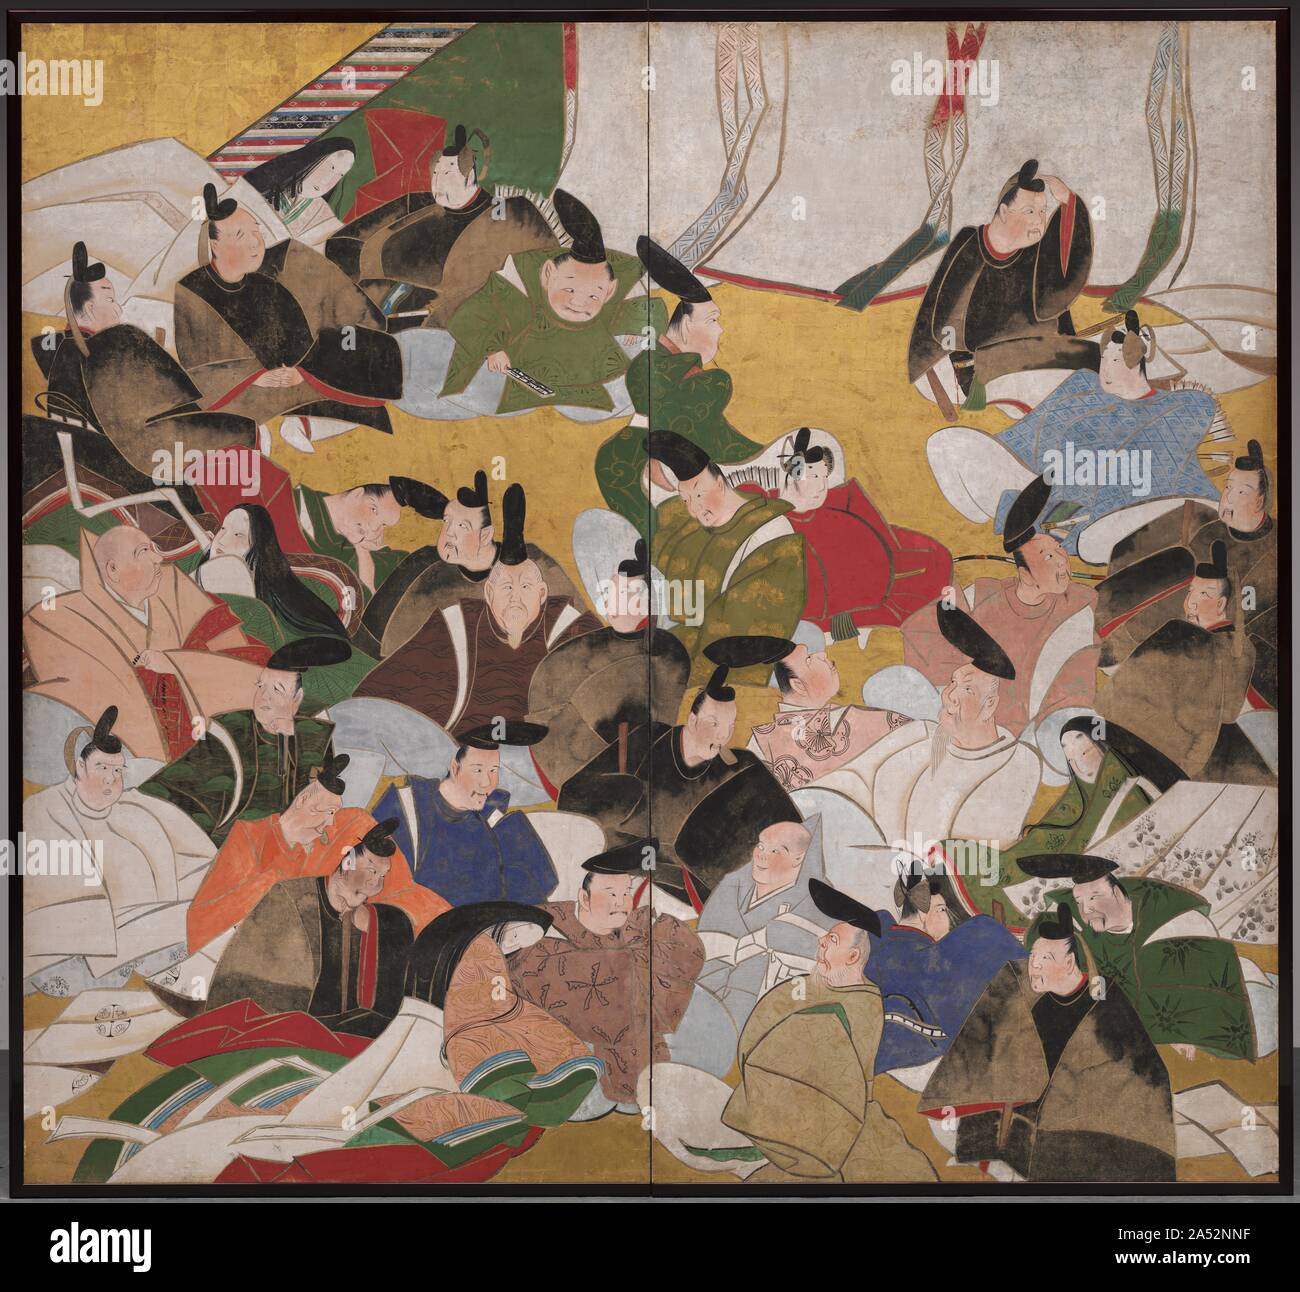 Thirty-Six Immortal Poets, mid 1700s. The &quot;Thirty-Six Immortal Poets&quot; were chosen by Fujiwara no Kinto (996-1075), a Japanese nobleman, scholar, and poet of the Heian period. He compiled a collection of the works of the 36 celebrated writers of  waka  (31-syllable poems) during the 7th to 11th centuries. From about the 11th century on, poetry and painting contests provided entertainment at fashionable gatherings, and the &quot;thirty-six poets&quot; became a favorite subject in Japanese art. These poets were traditionally portrayed in a dignified manner befitting their aristocratic r Stock Photo